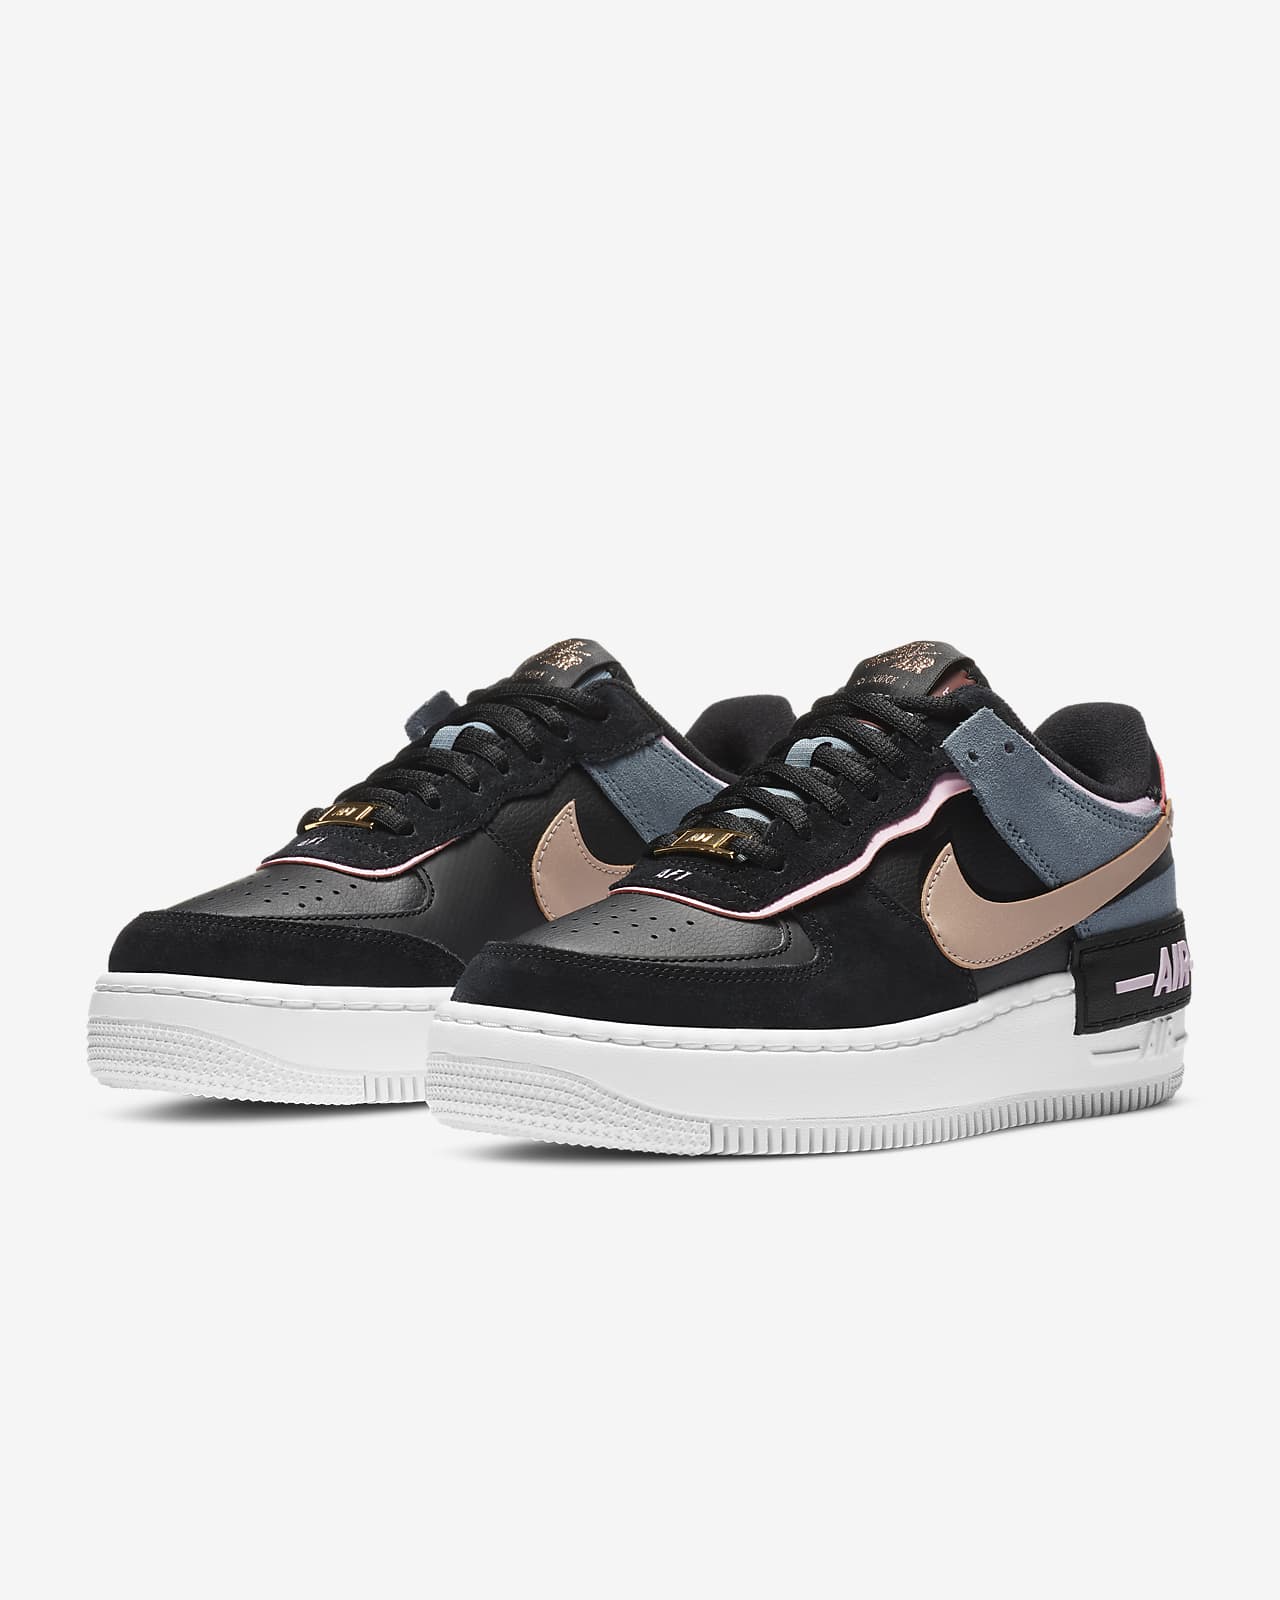 nike force 1 shadow pink